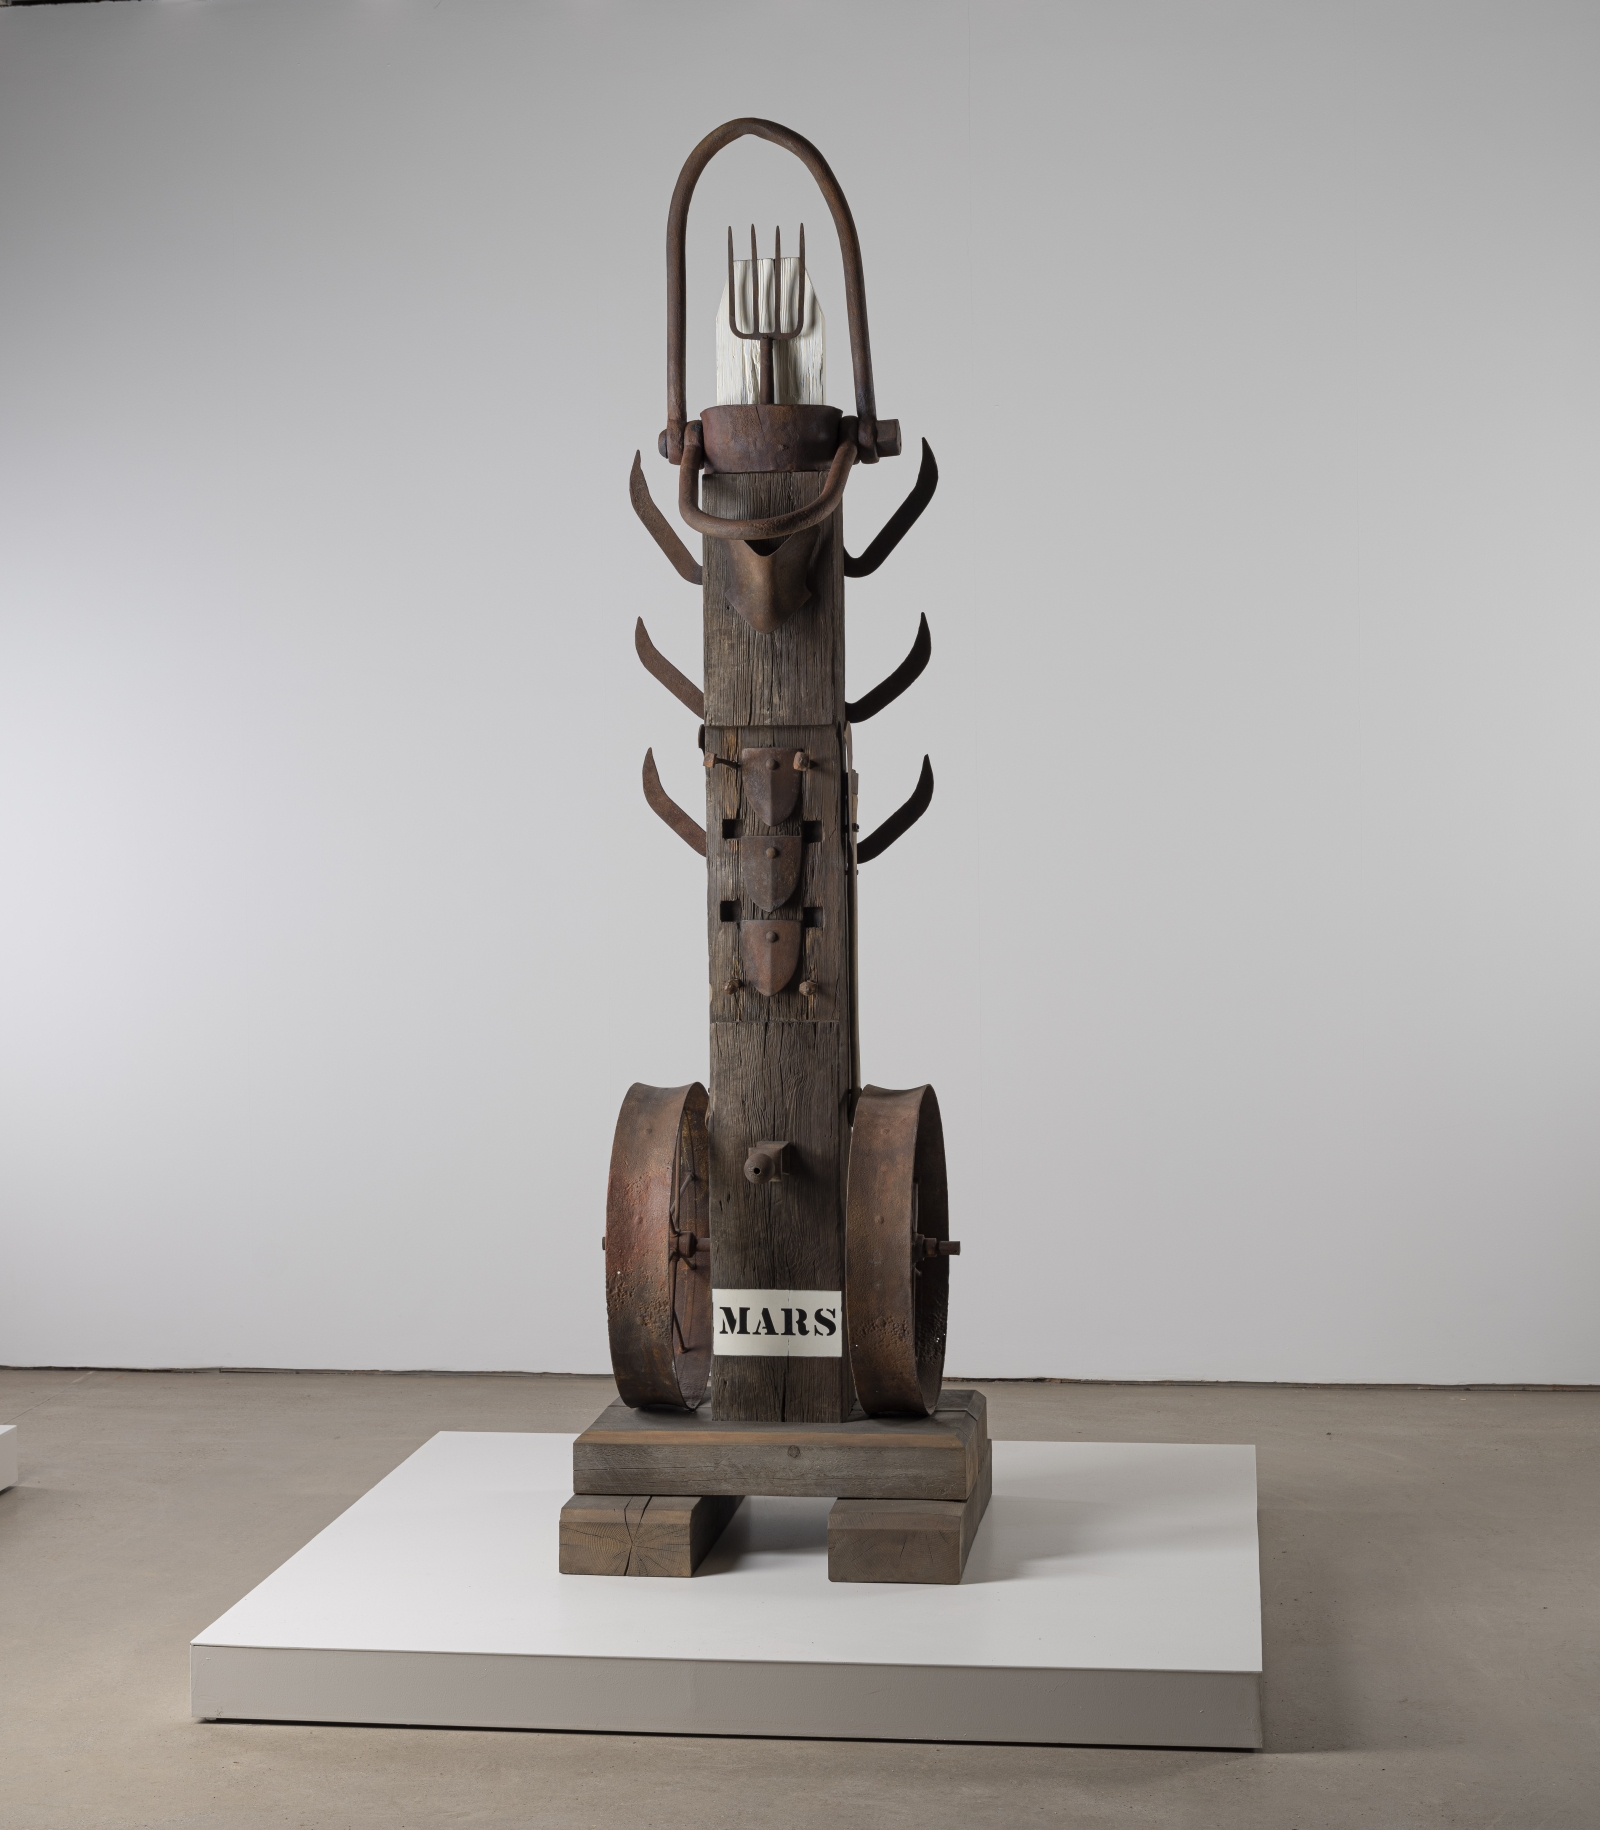 A 131 5/8 by 35 7/8 by 35 7/8 inch painted bronze sculpture consisting of a beam atop a base. The work's title, "Mars," appears in stenciled letters against a white ground across the front bottom of the sculpture. A wheel is affixed to both the bottom right and left sides of the sculpture. Three brush axes have been affixed to both the upper right and upper left sides of, and a pitchfork has been affixed at the top of the sculpture.